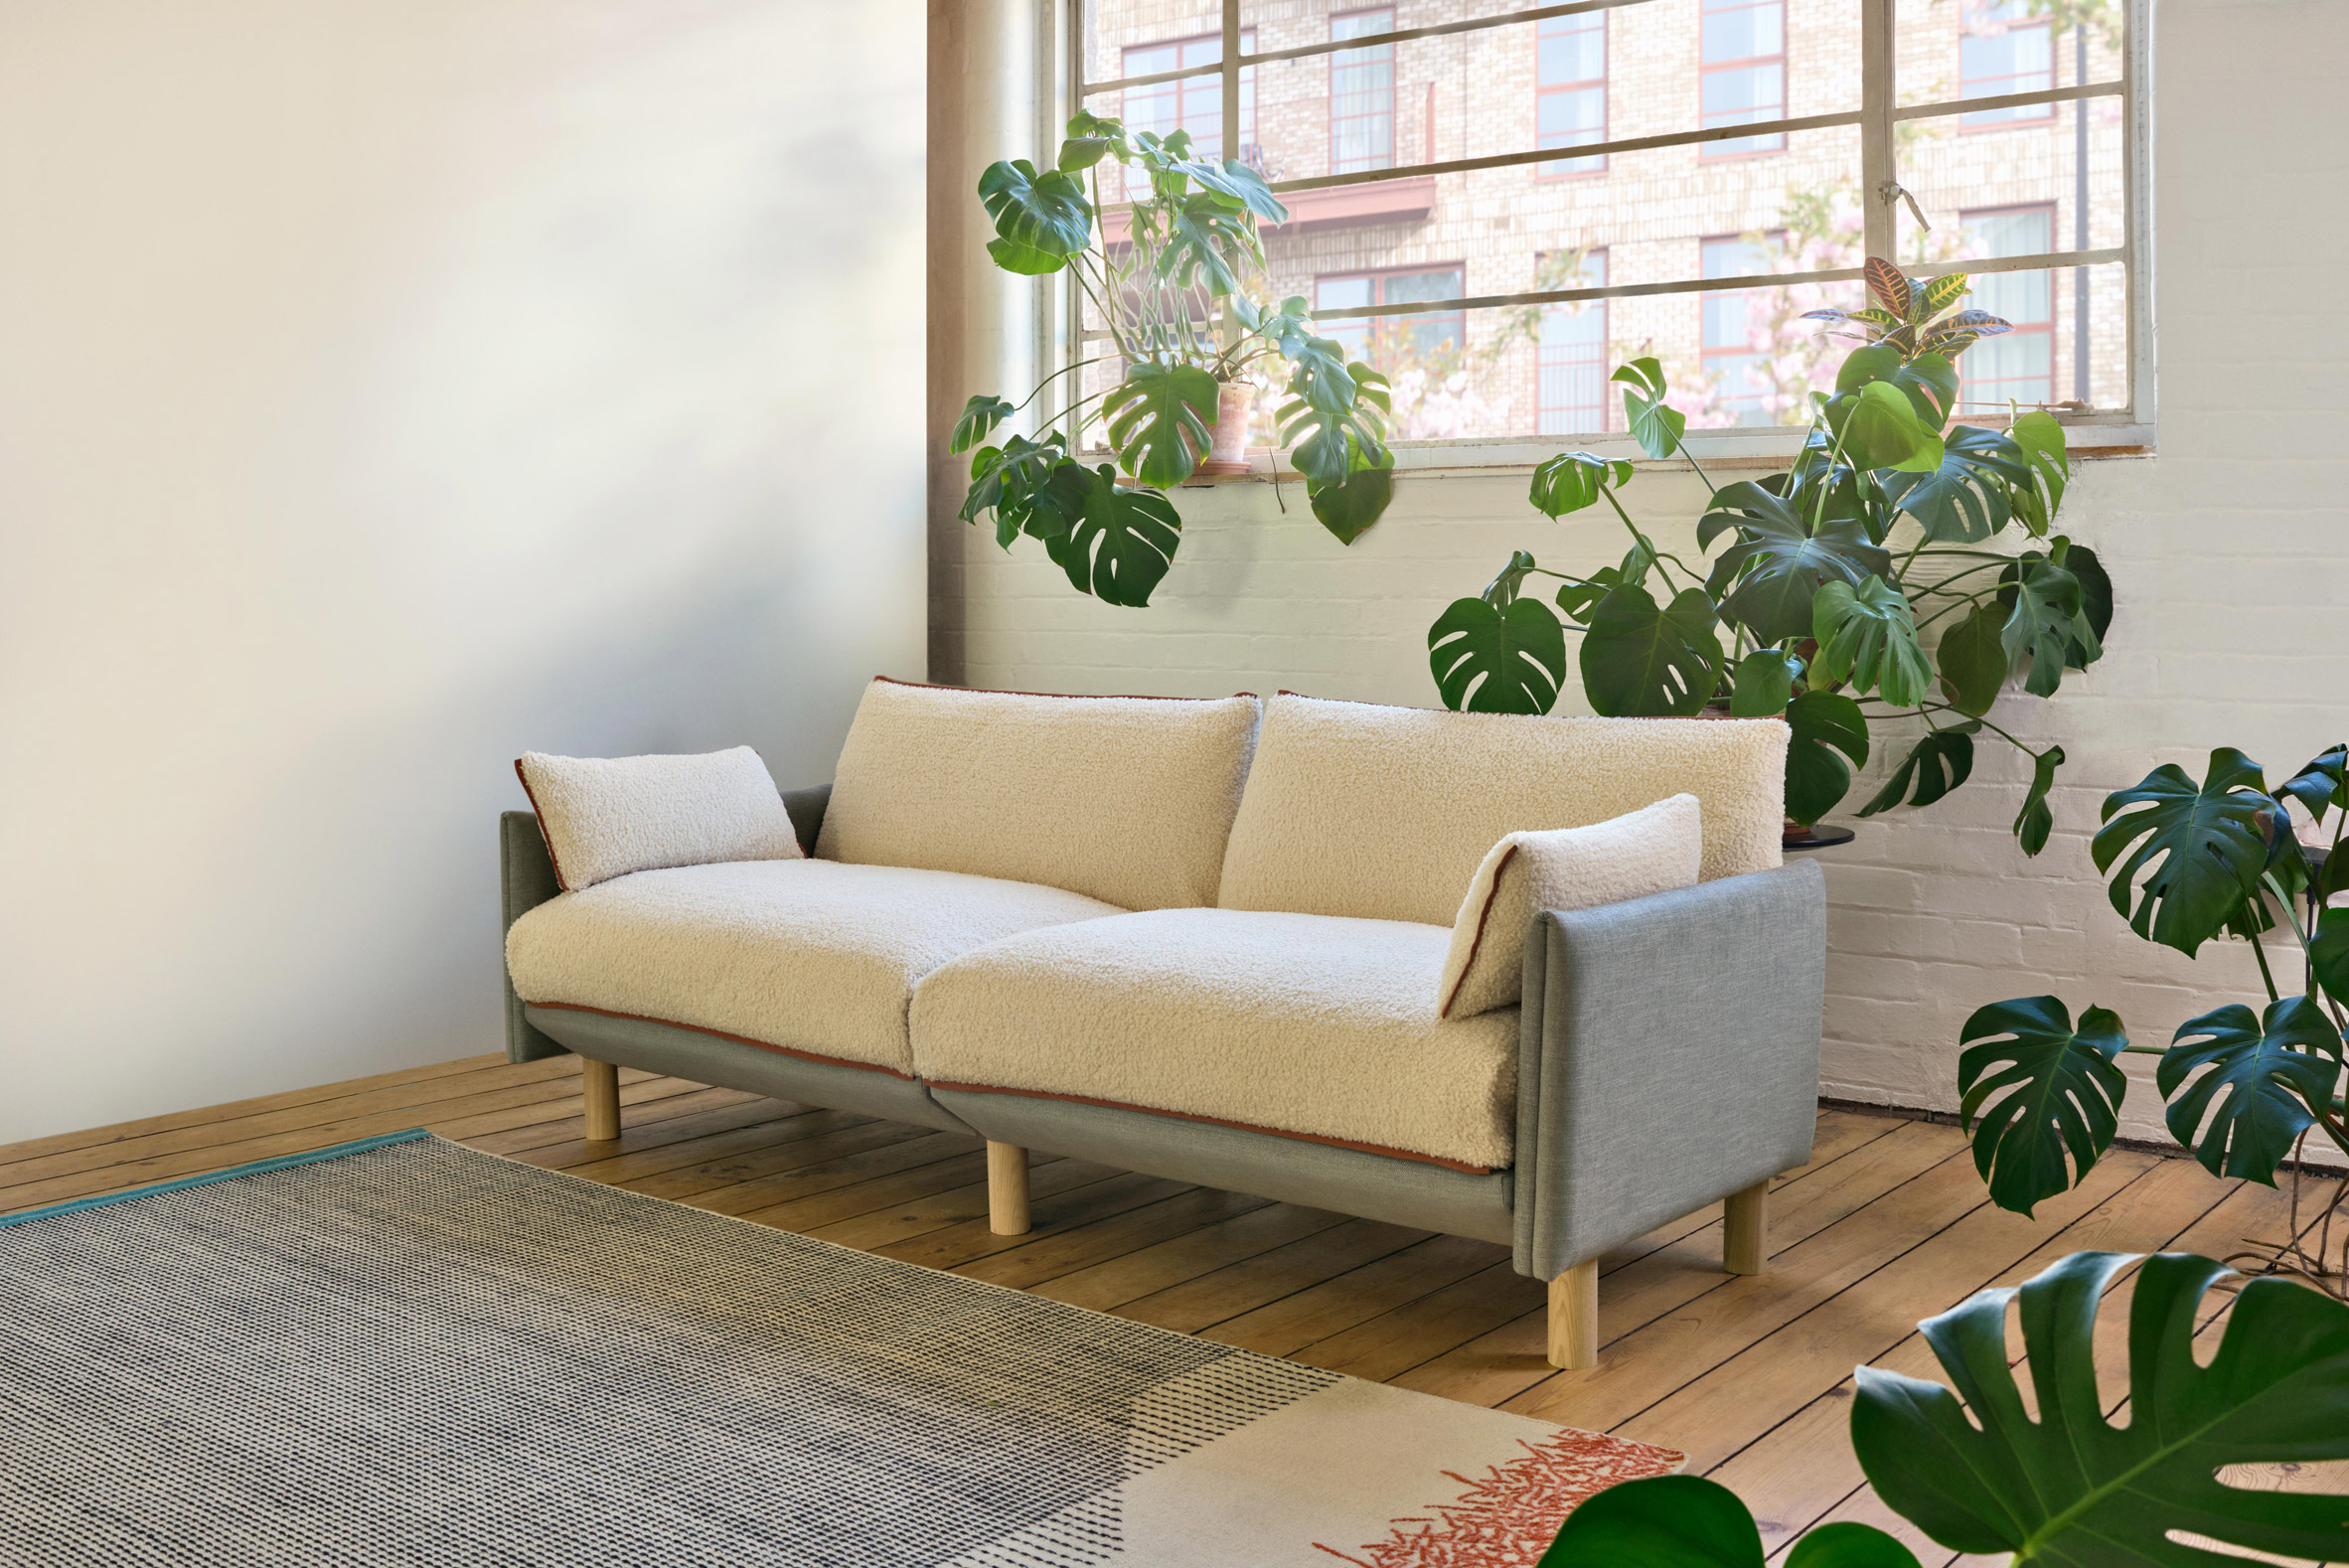 Sofa with white cover in room with plants